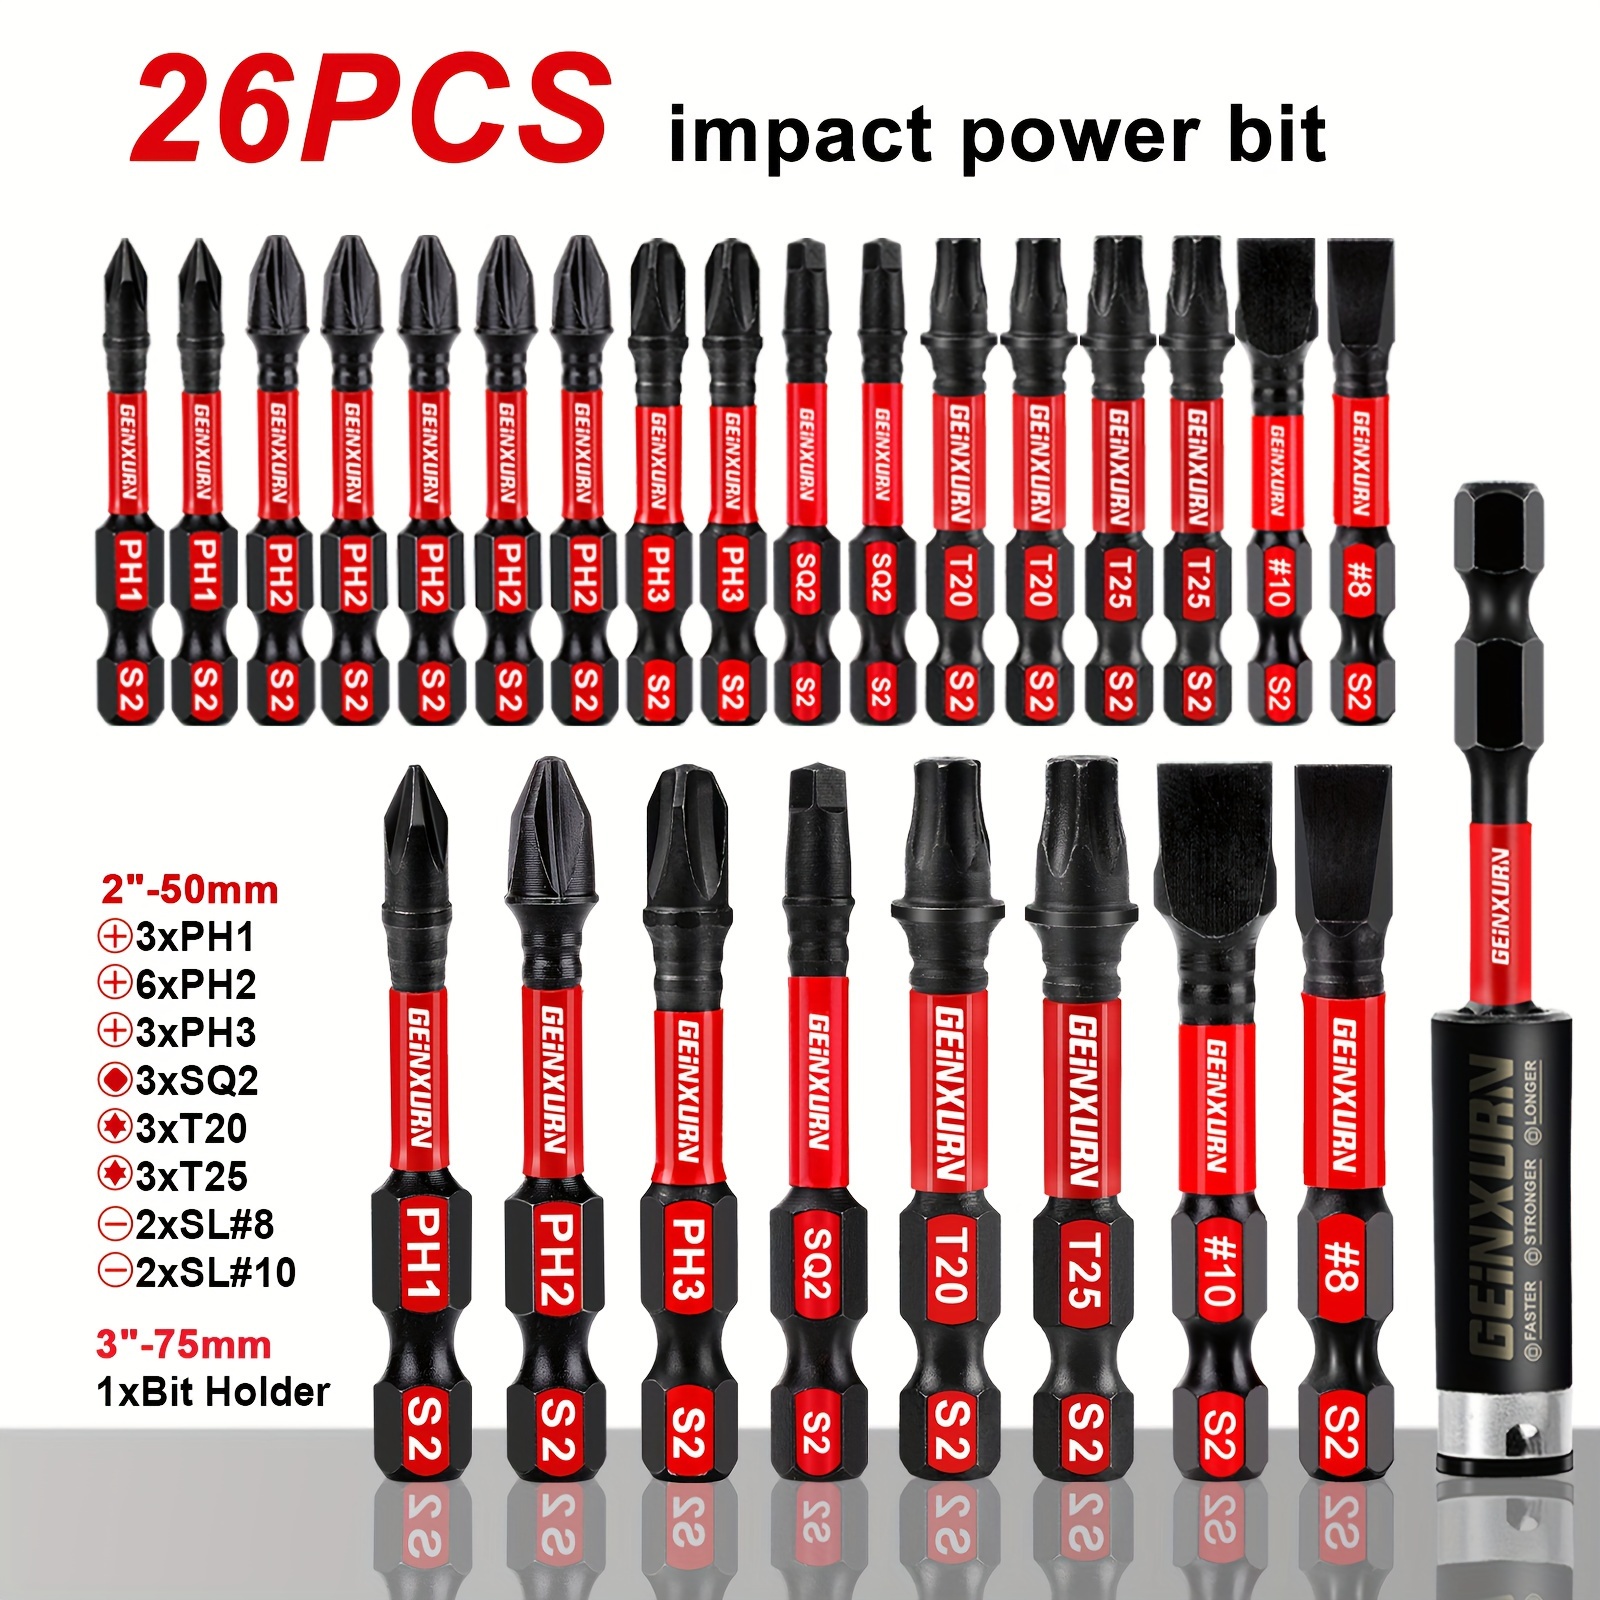 

Geinxurn 26pc Impact Power Bit Set, S2 Steel Hex Shank Screwdriver Bits, Assorted Ph1 Ph2 Ph3 Sl T20 T25 Sq2 Heads, Includes Magnetic Bit Holder, Durable Mixed Drive Kit For Electric Drills